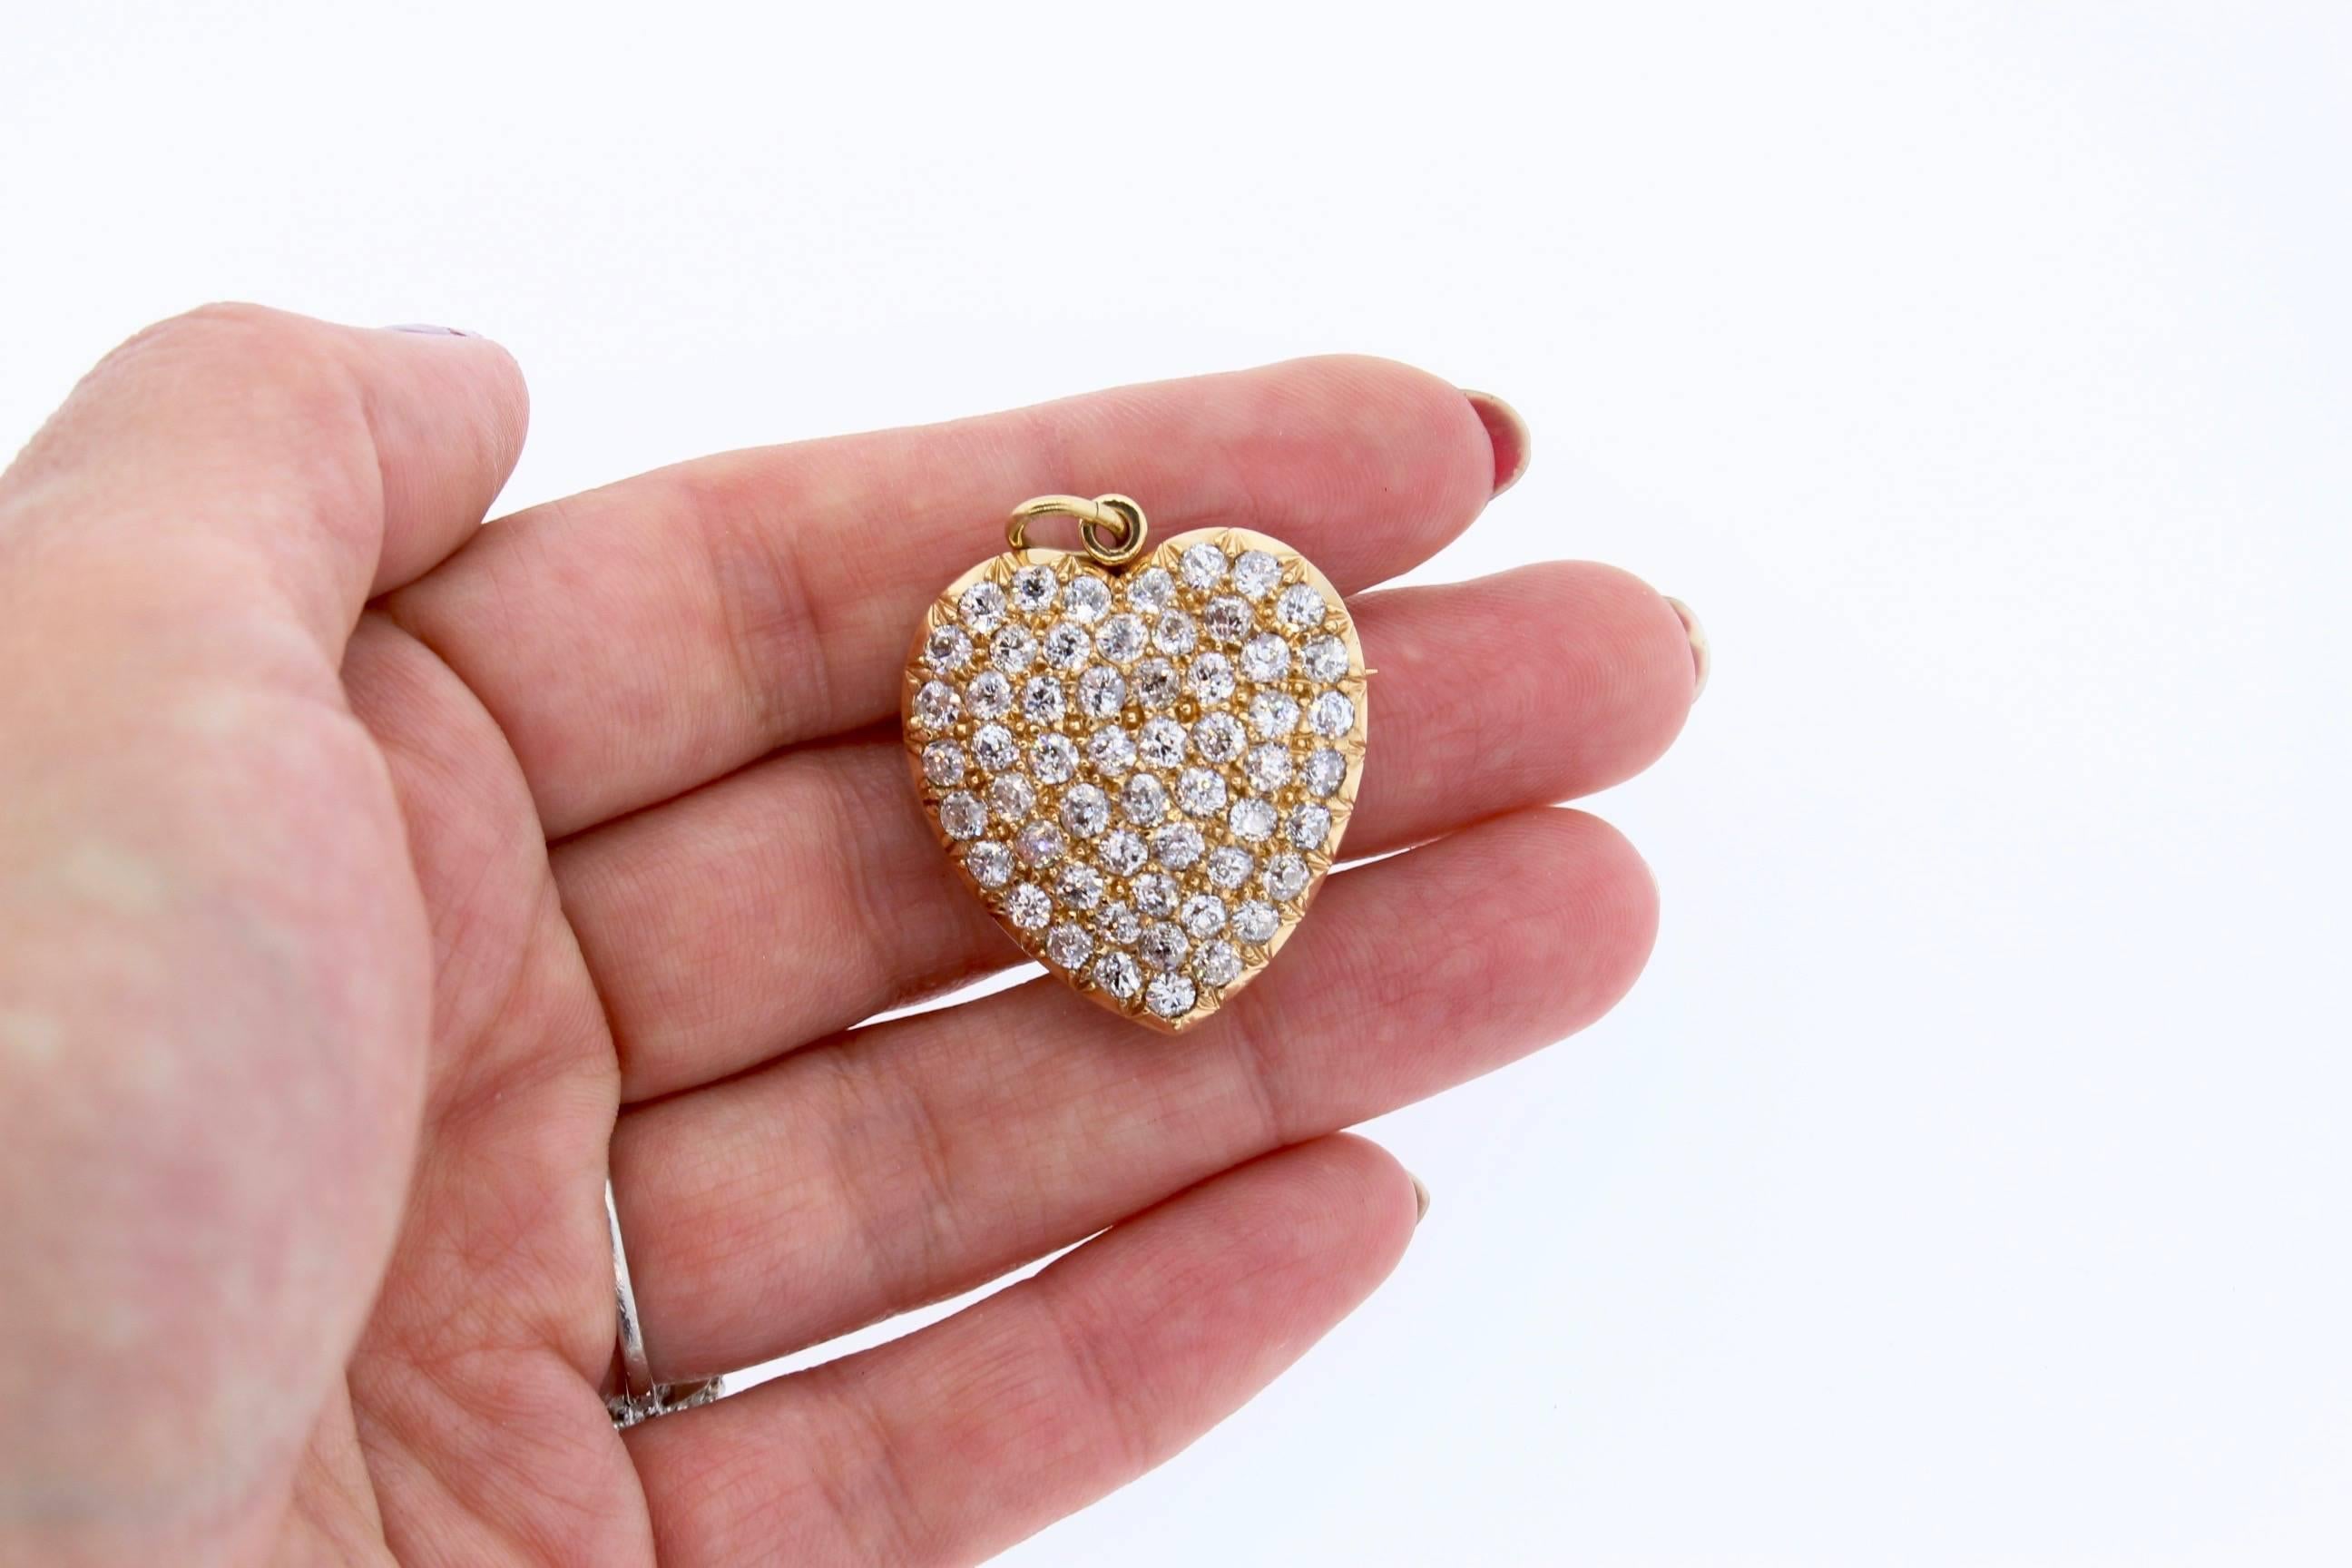 An 18k yellow gold and diamond heart pin/pendant circa 1890.  The pendant has a bail that moves up or down and a pin back which can be screwed to come off the back.  The pendant is set with 55 old mine cut diamonds weighing approximately 7 cts